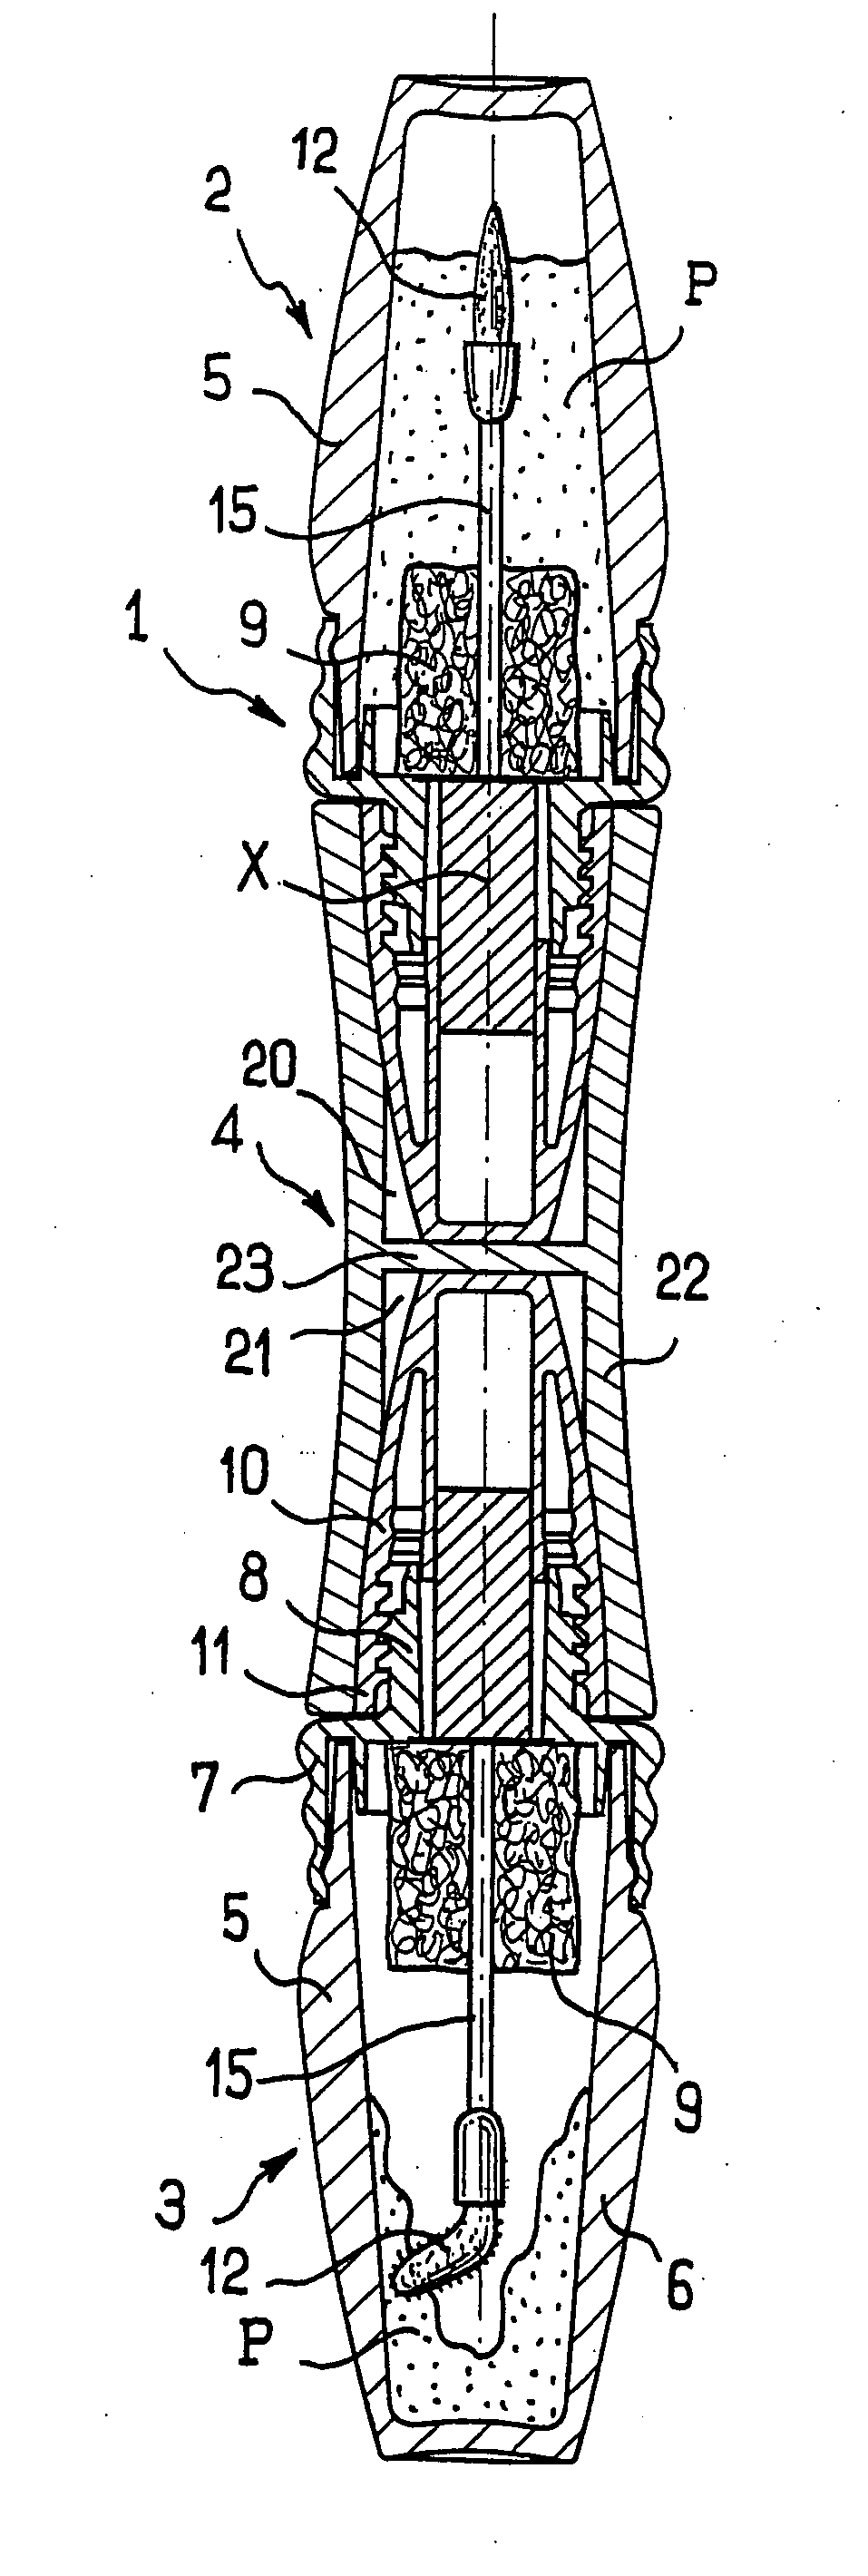 Packaging and applicator device including a coupling member enabling two receptacles to be united